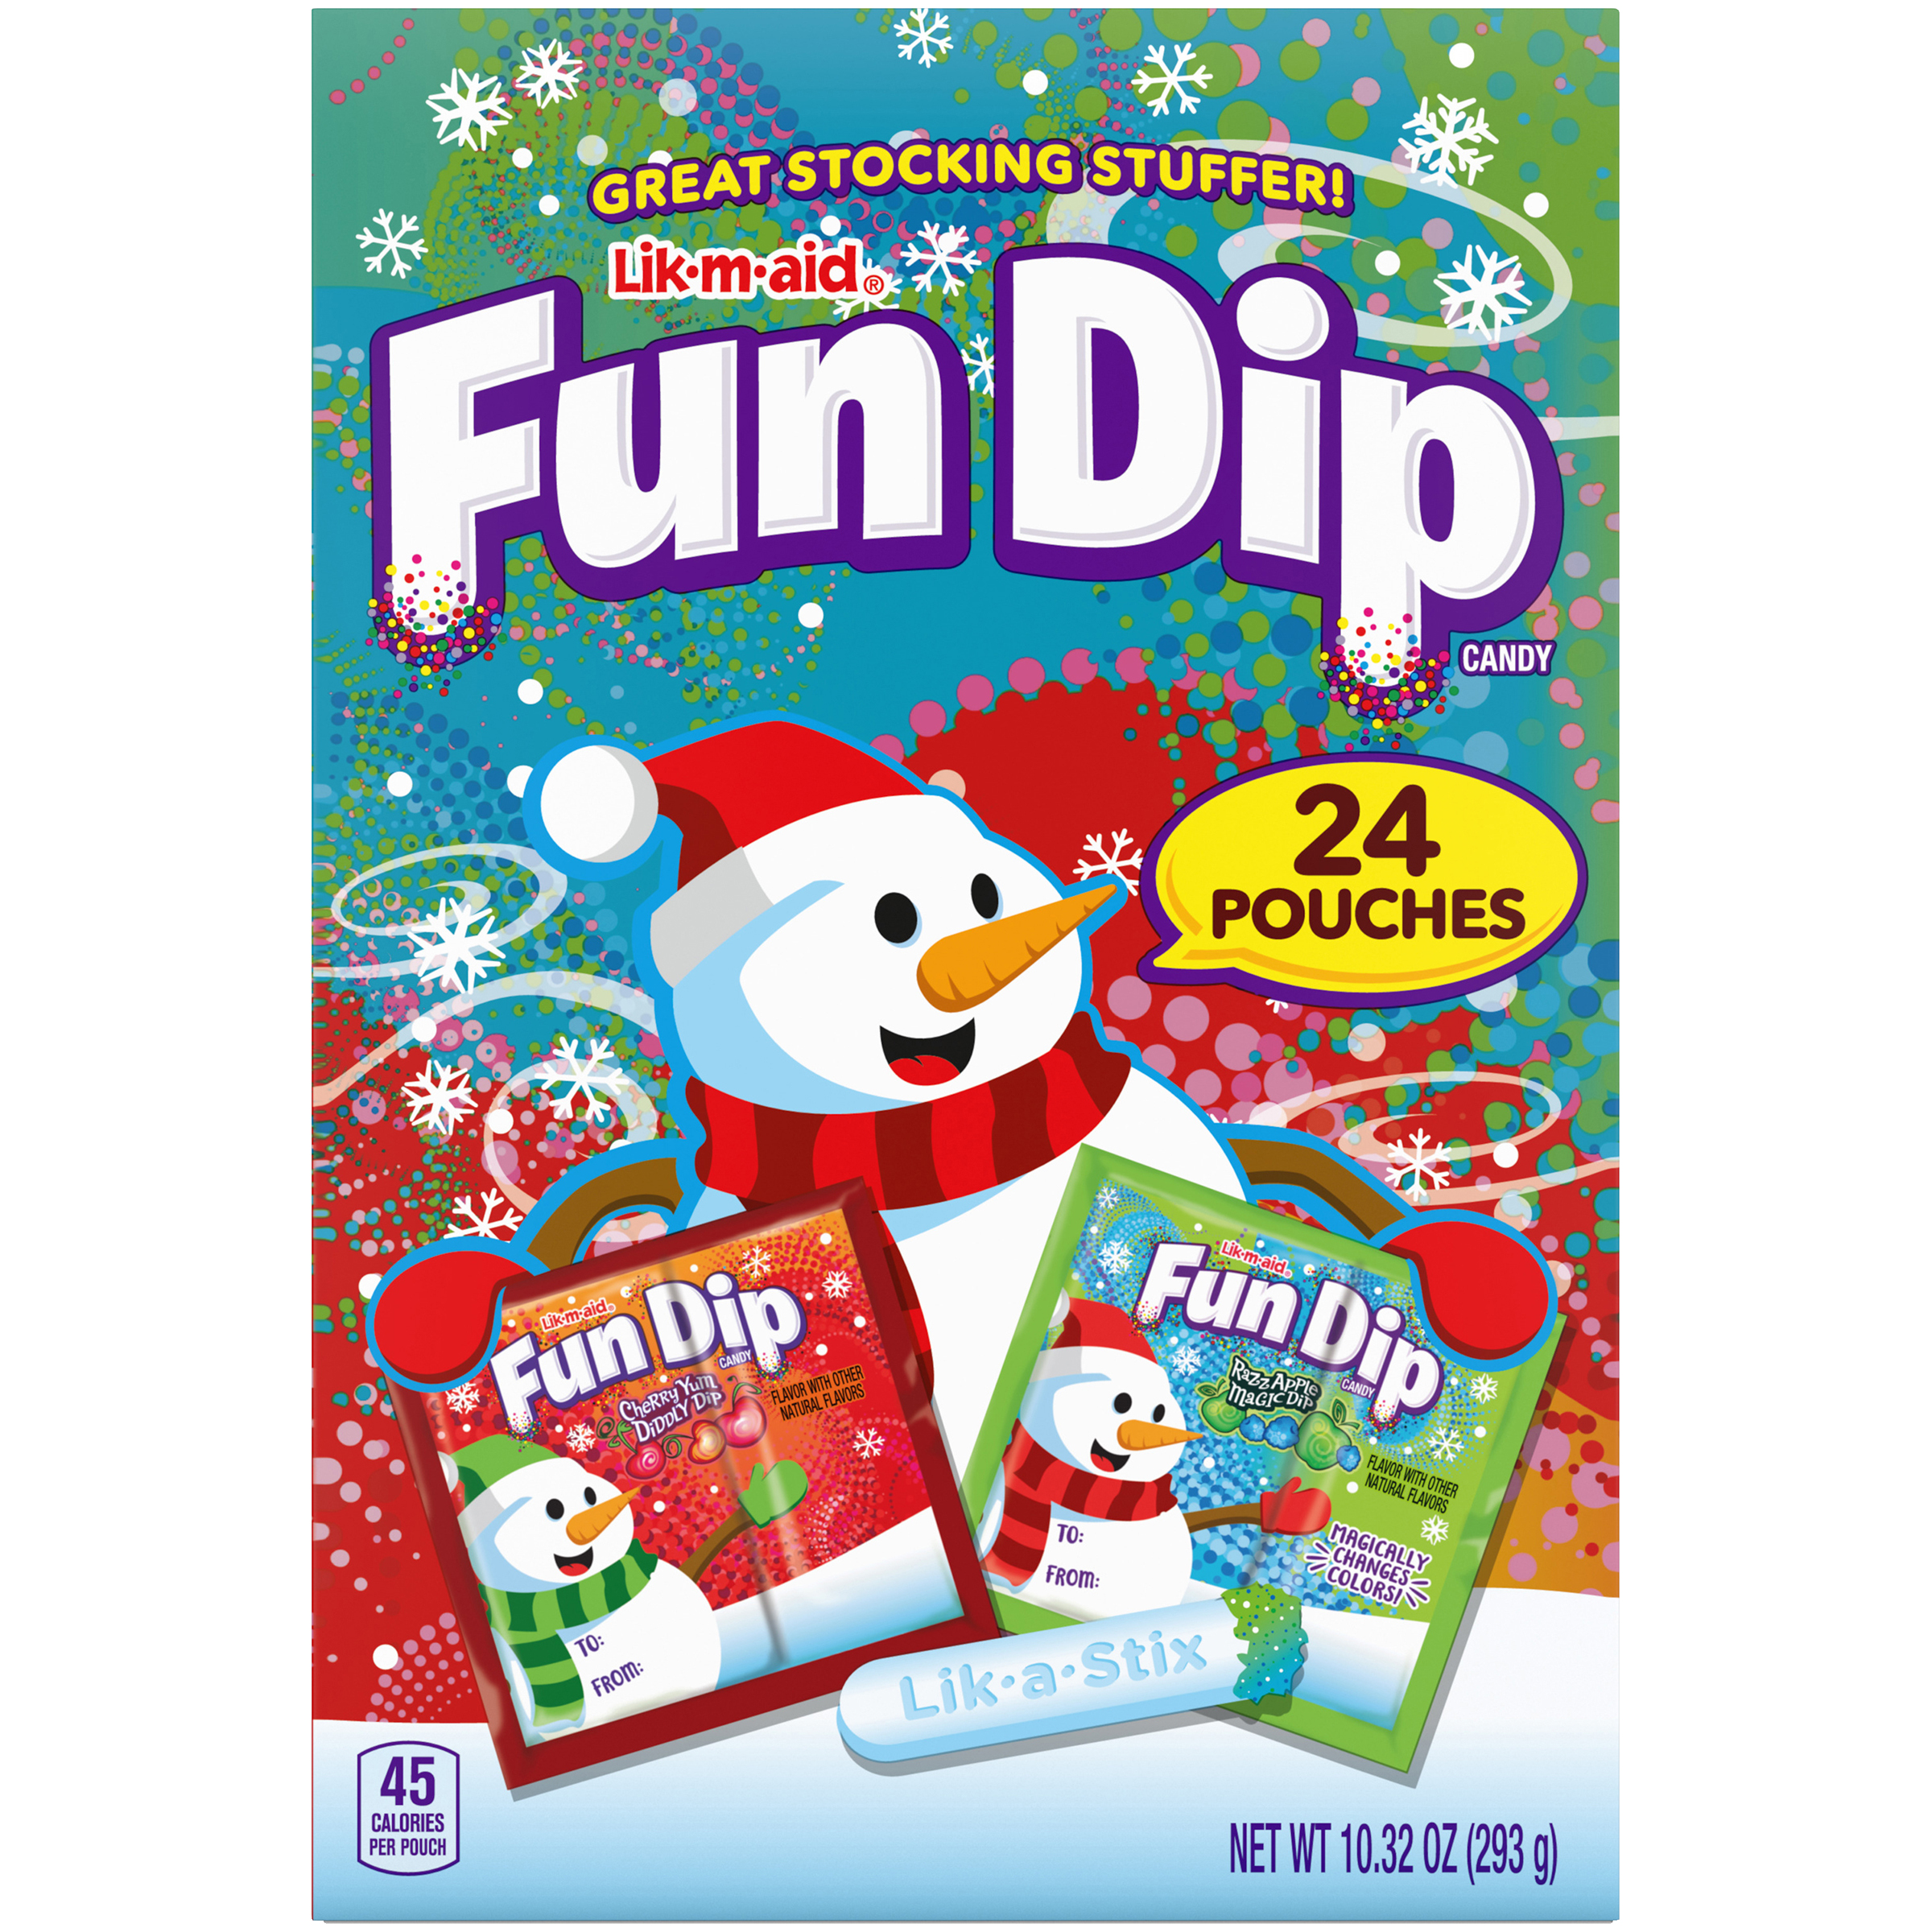 Fun Dip Candy Holiday Variety Pack, Holiday Candy, Christmas Stocking Stuffers 24 Pouches, 10.3oz - image 3 of 11